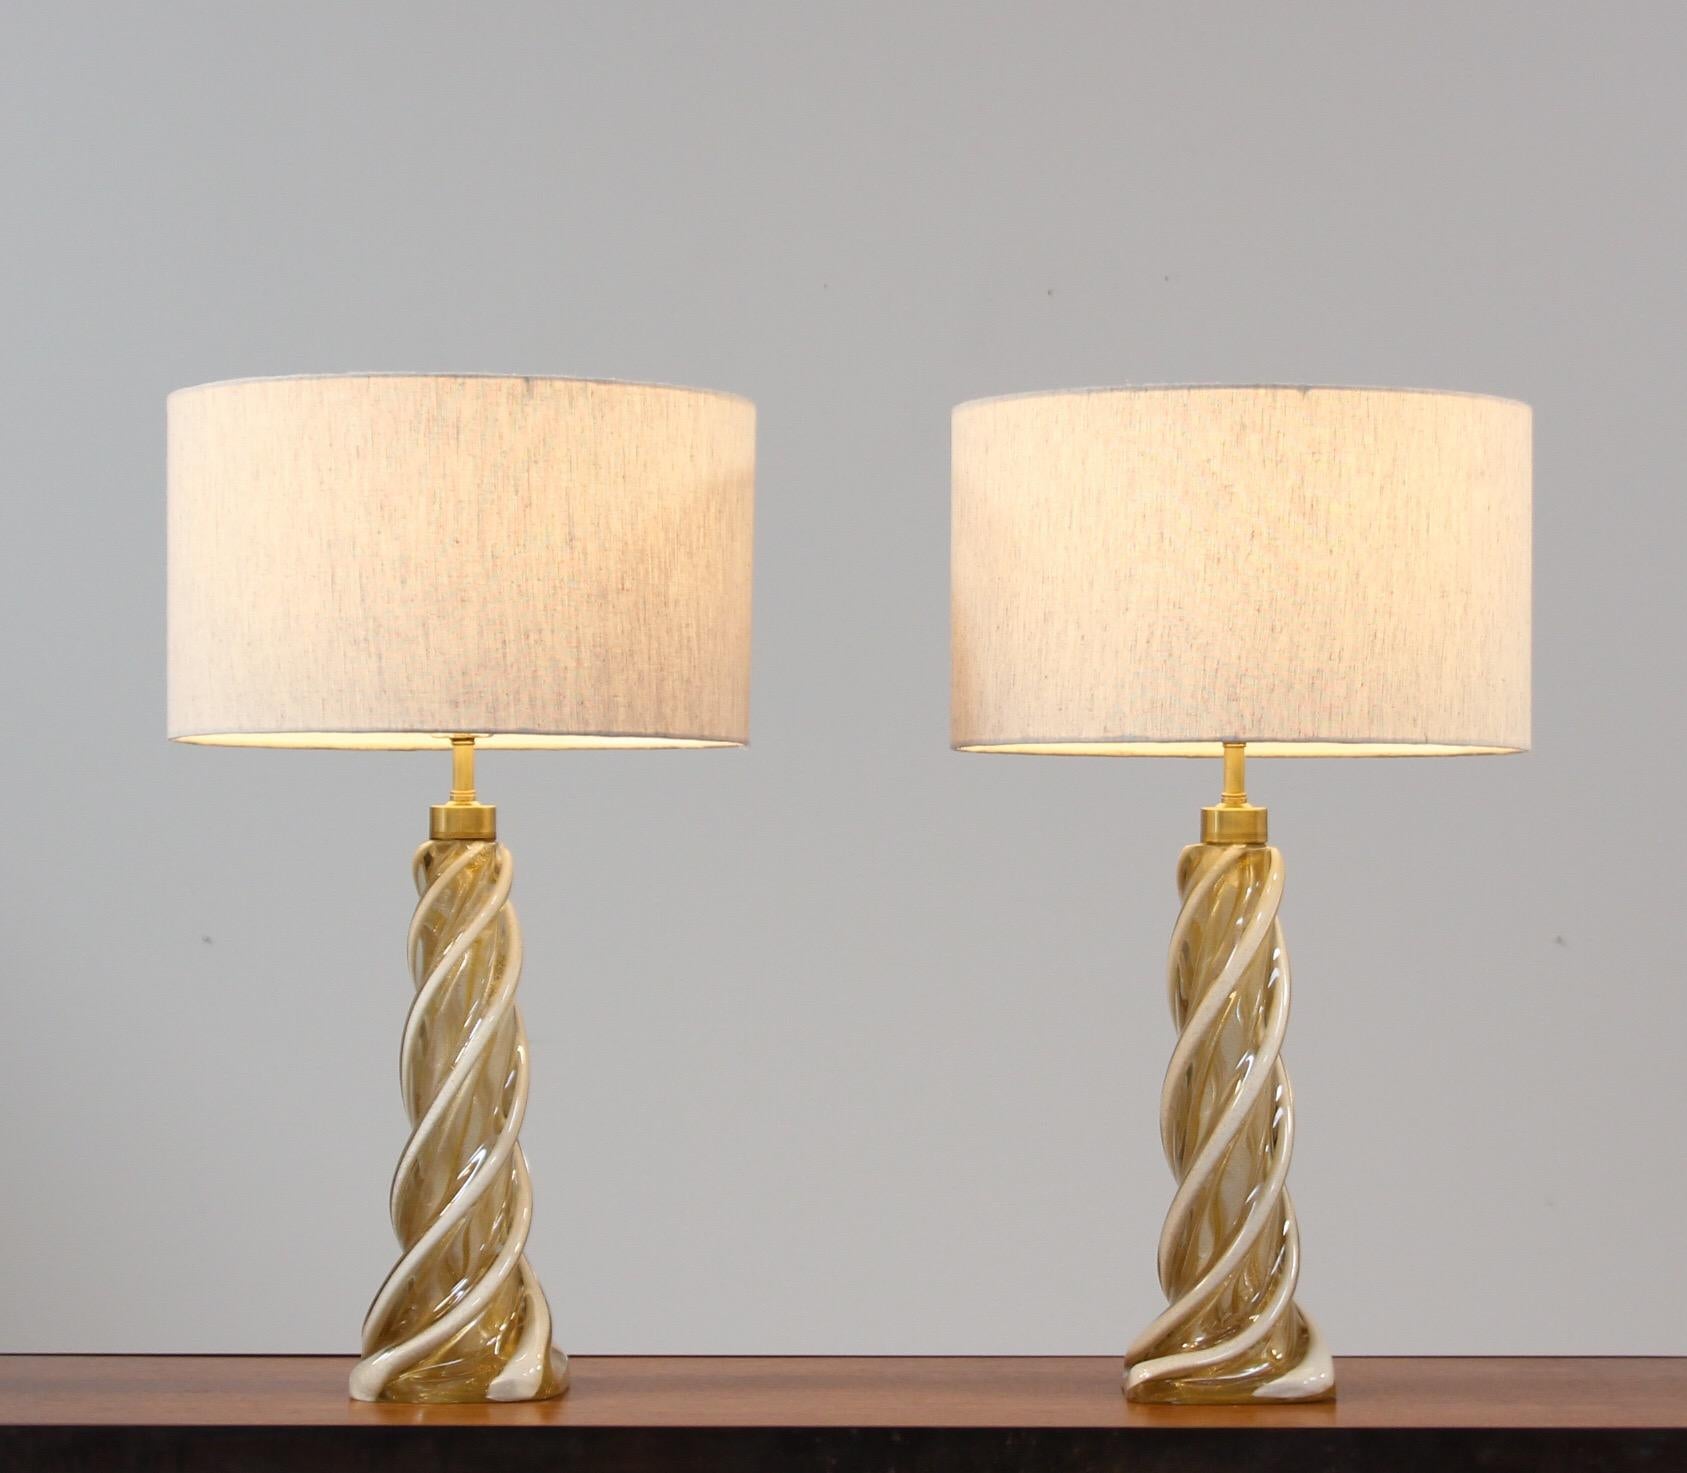 Spectacular pair of 1960s Murano glass lamps executed in a beautiful pattern consisting of white and gold flecked swirls by Seguso Vetri D’Arte. Both lamps are in excellent condition with no chips or cracks. 

If you’re in search of that special